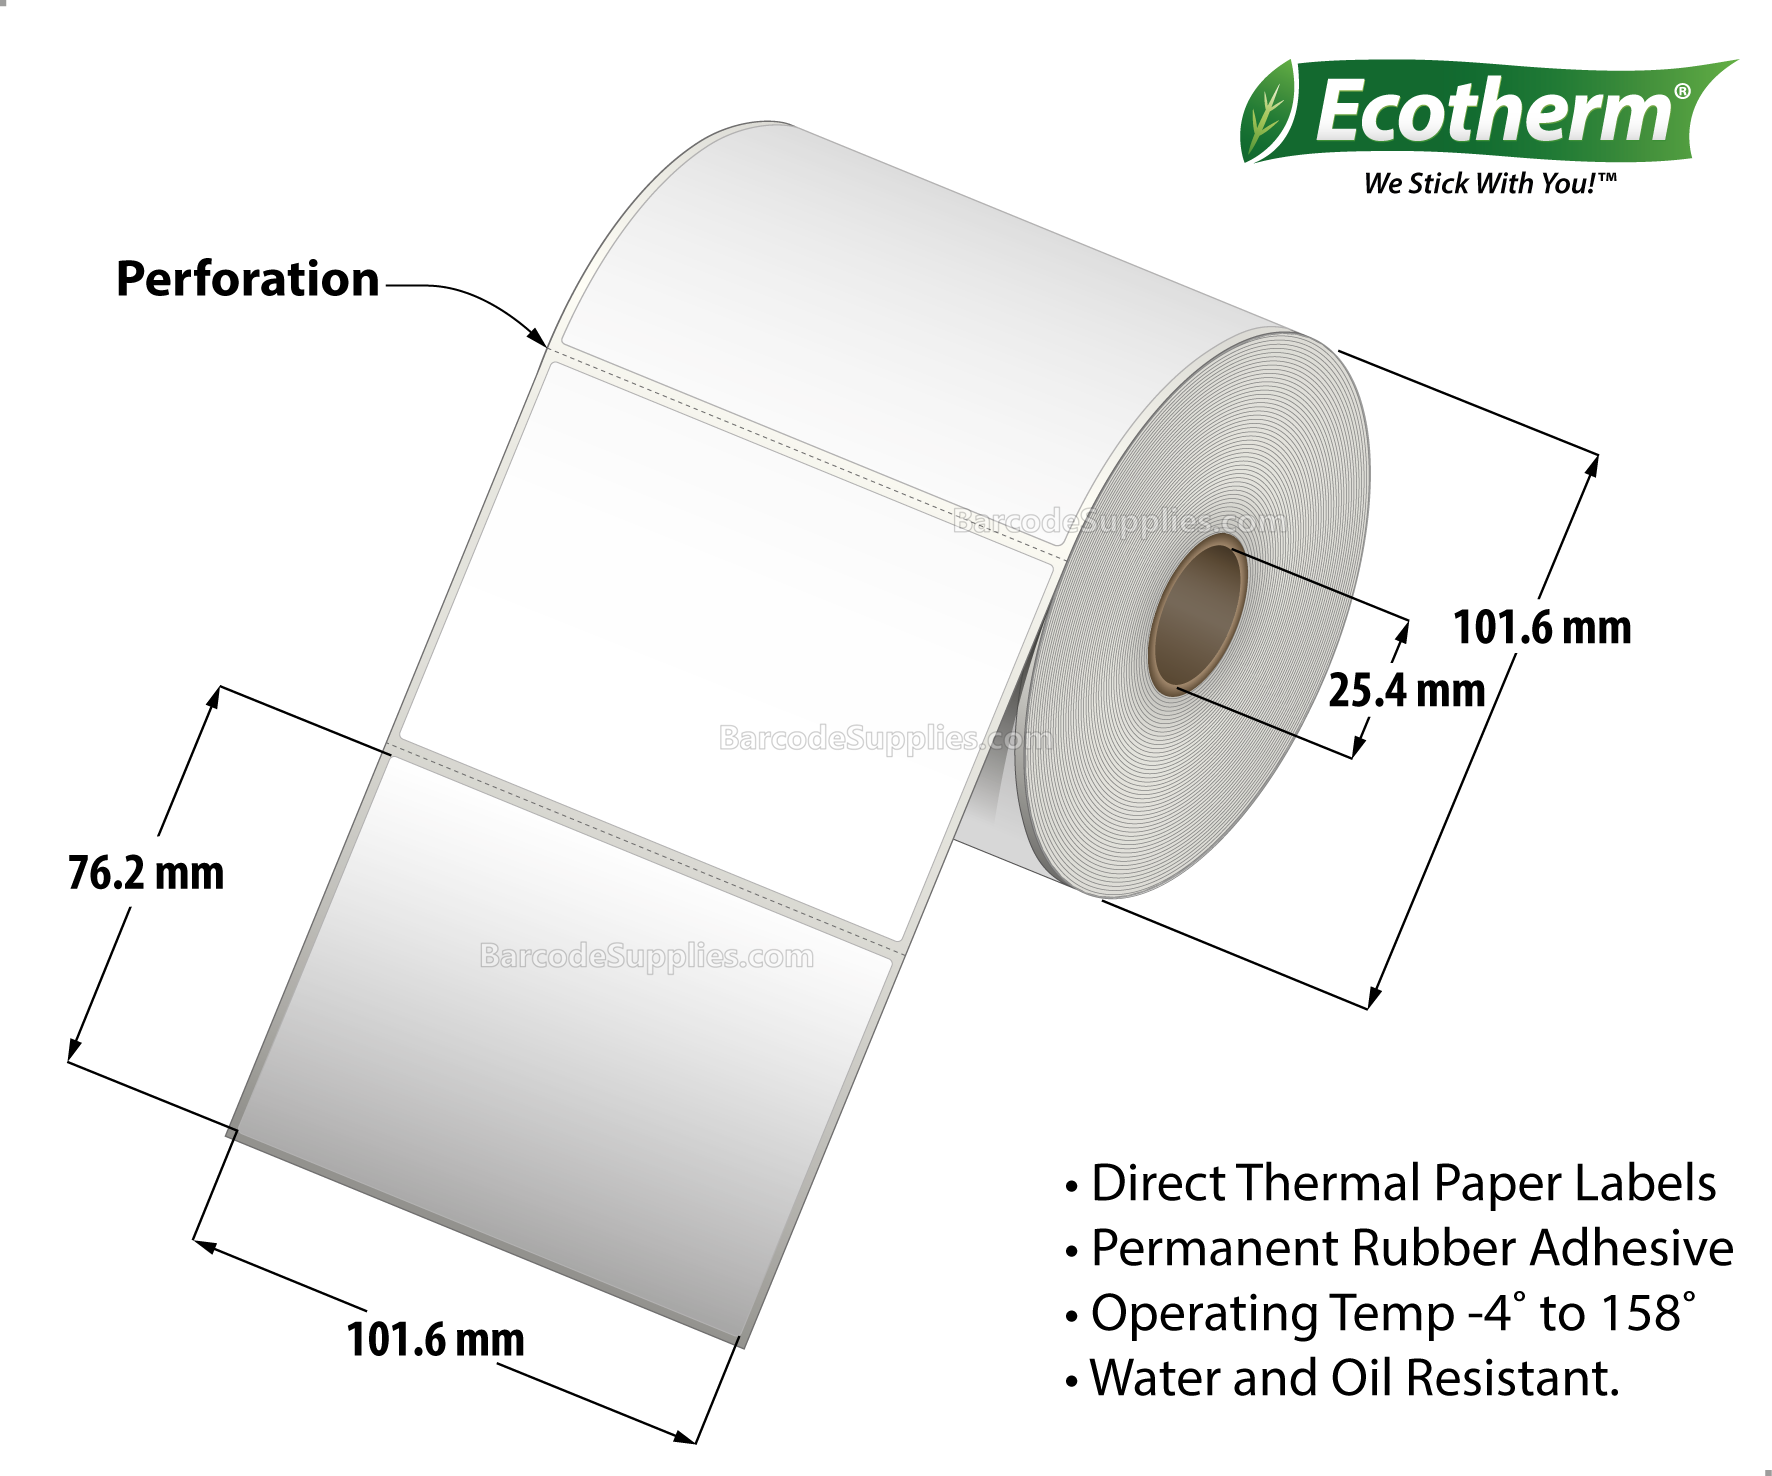 4 x 3 Direct Thermal White Labels With Rubber Adhesive - Perforated - 525 Labels Per Roll - Carton Of 4 Rolls - 2100 Labels Total - MPN: ECOTHERM14128-4